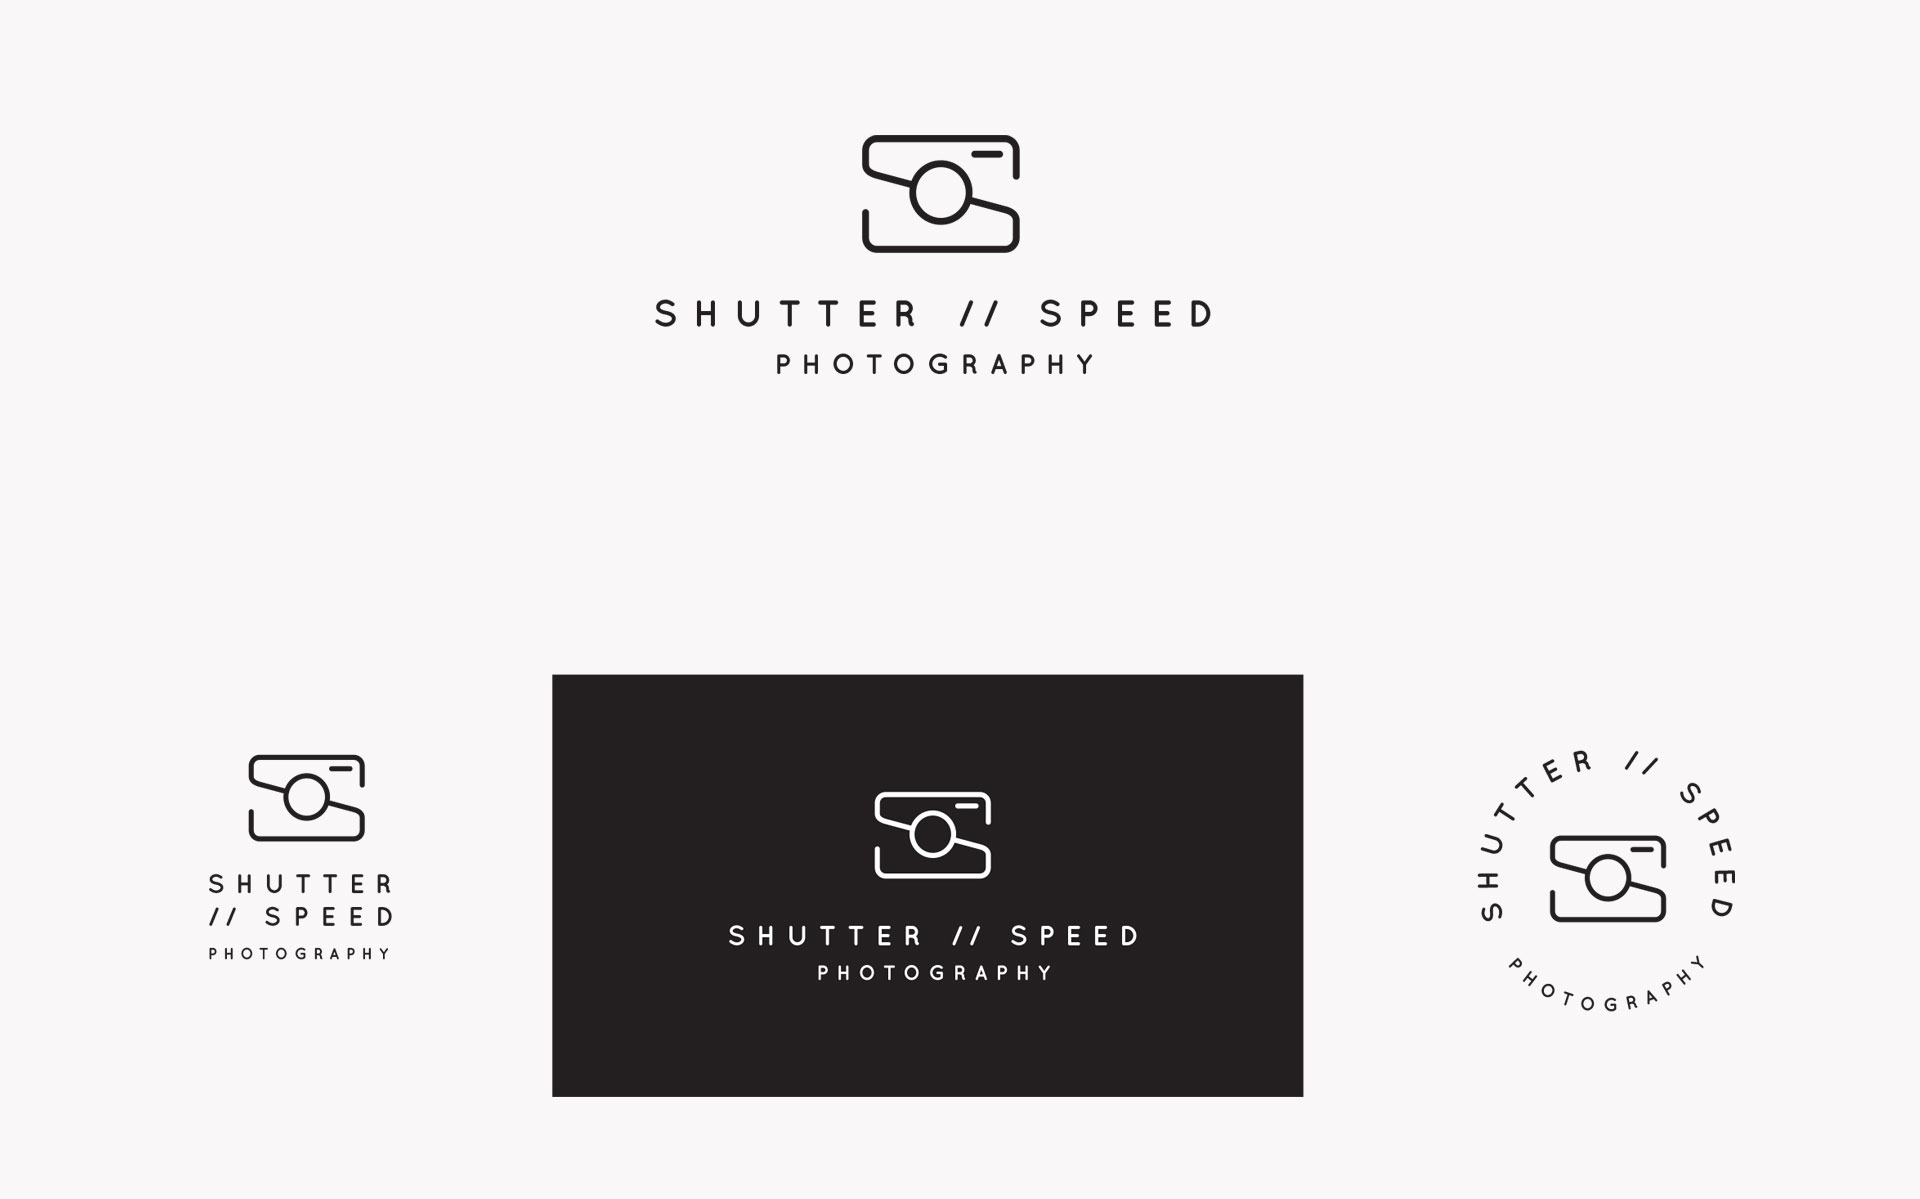 Shutterspeed logo, branding, marketing & online design & build by Amy at Yellow Sunday